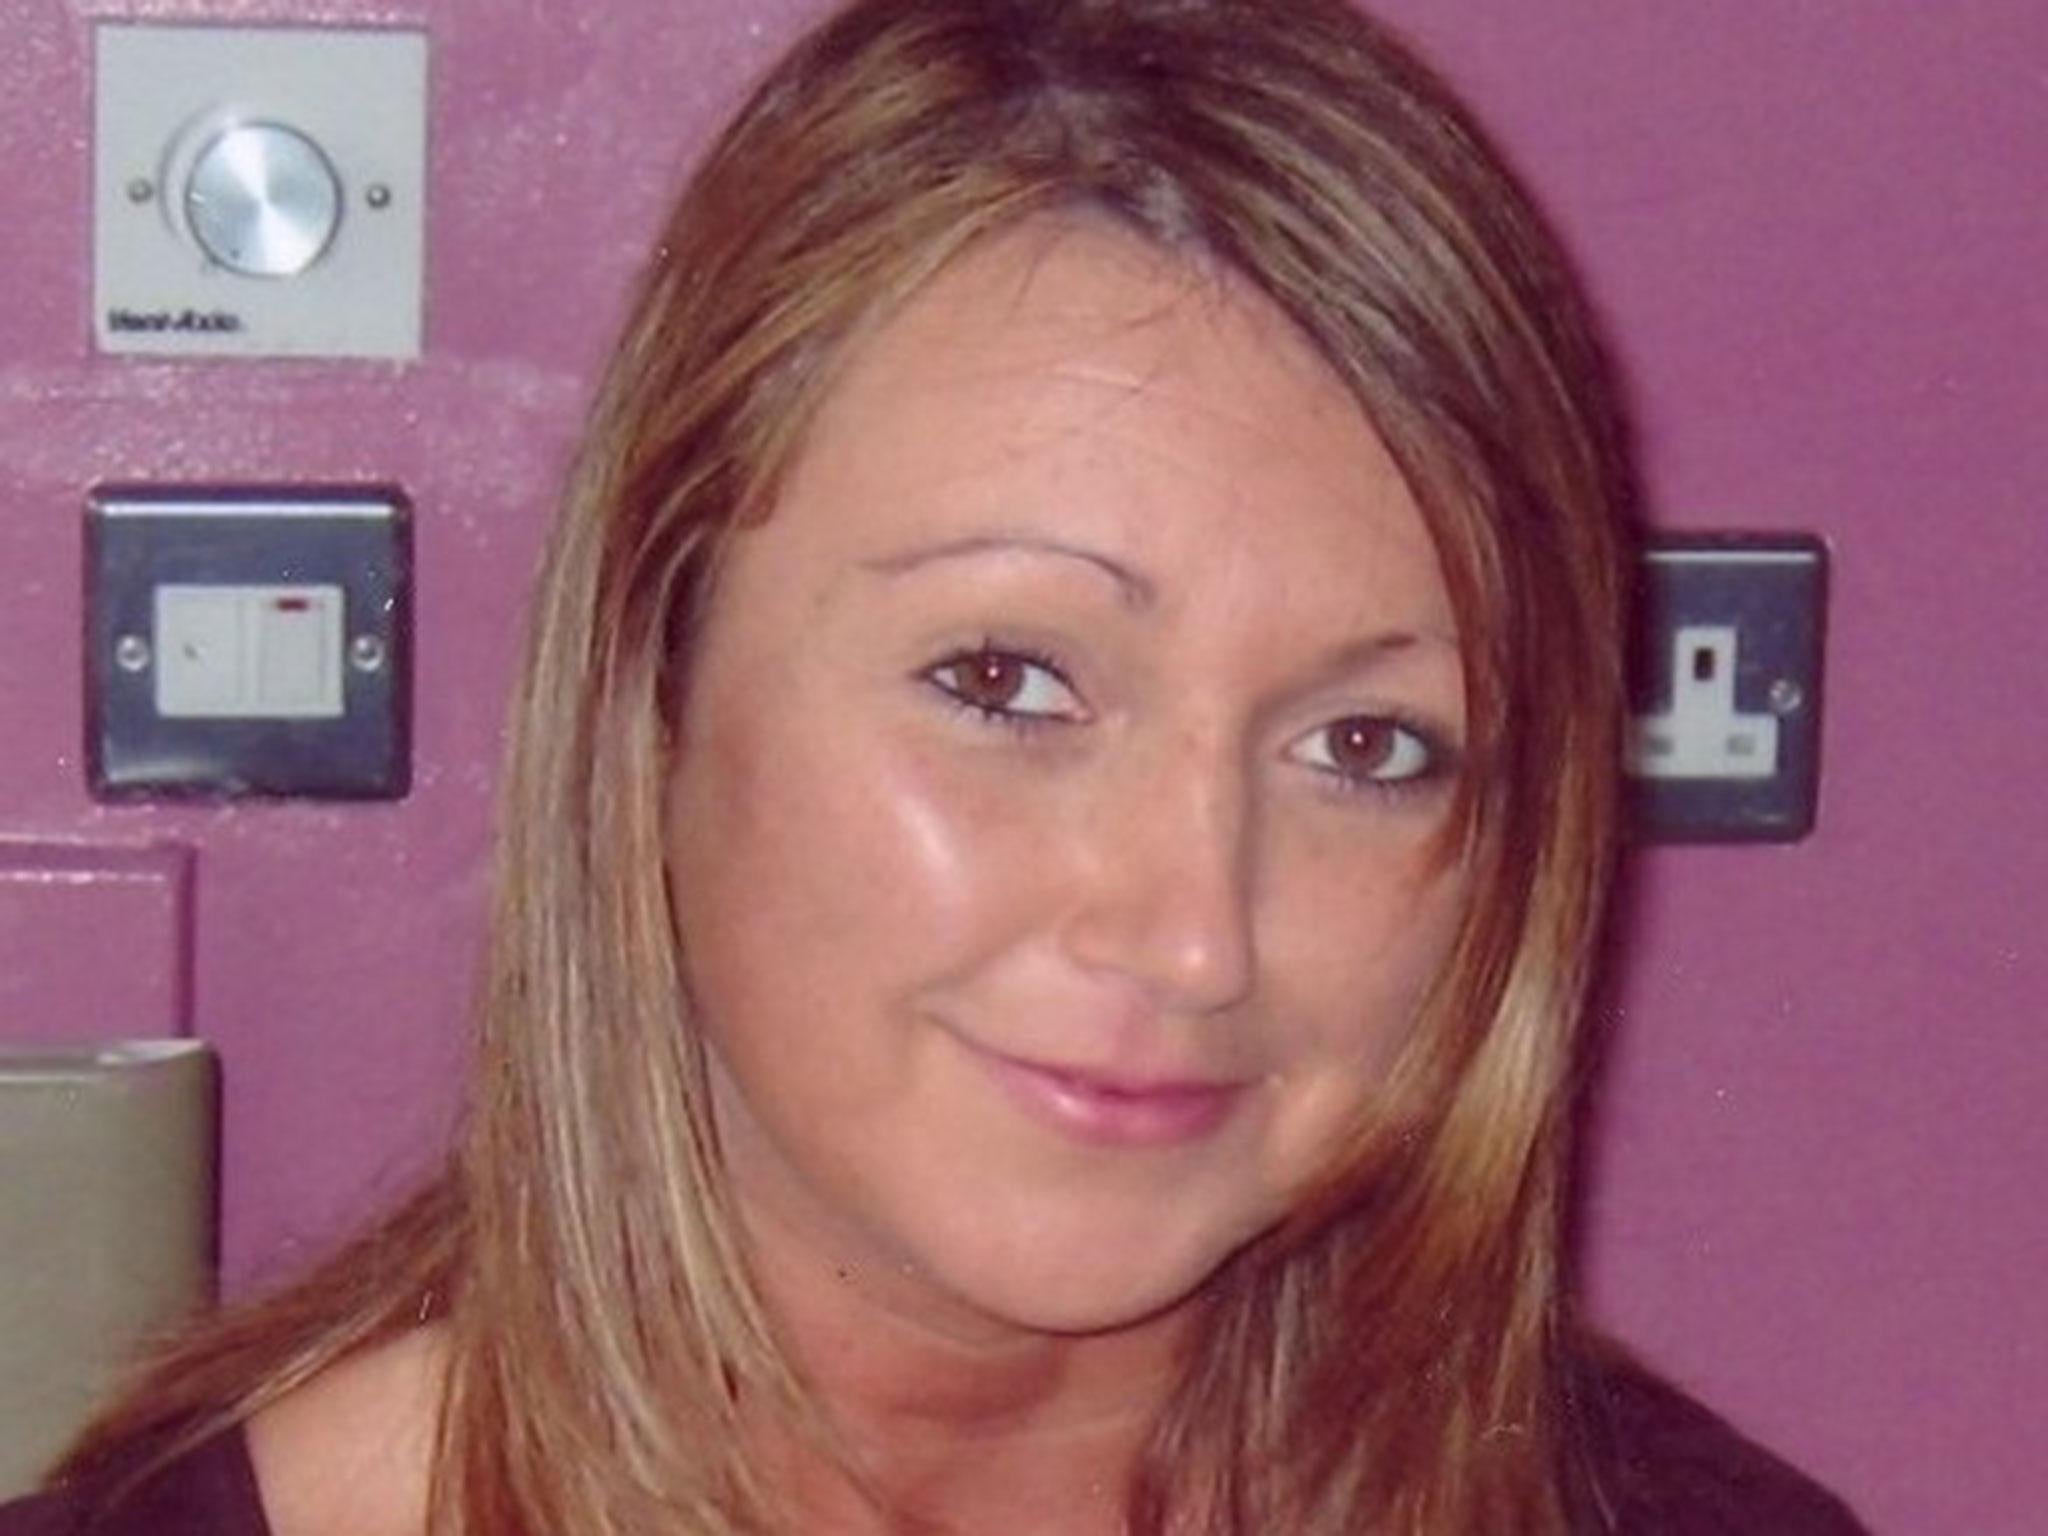 Claudia Lawrence was last seen alive on 18 March, 2009